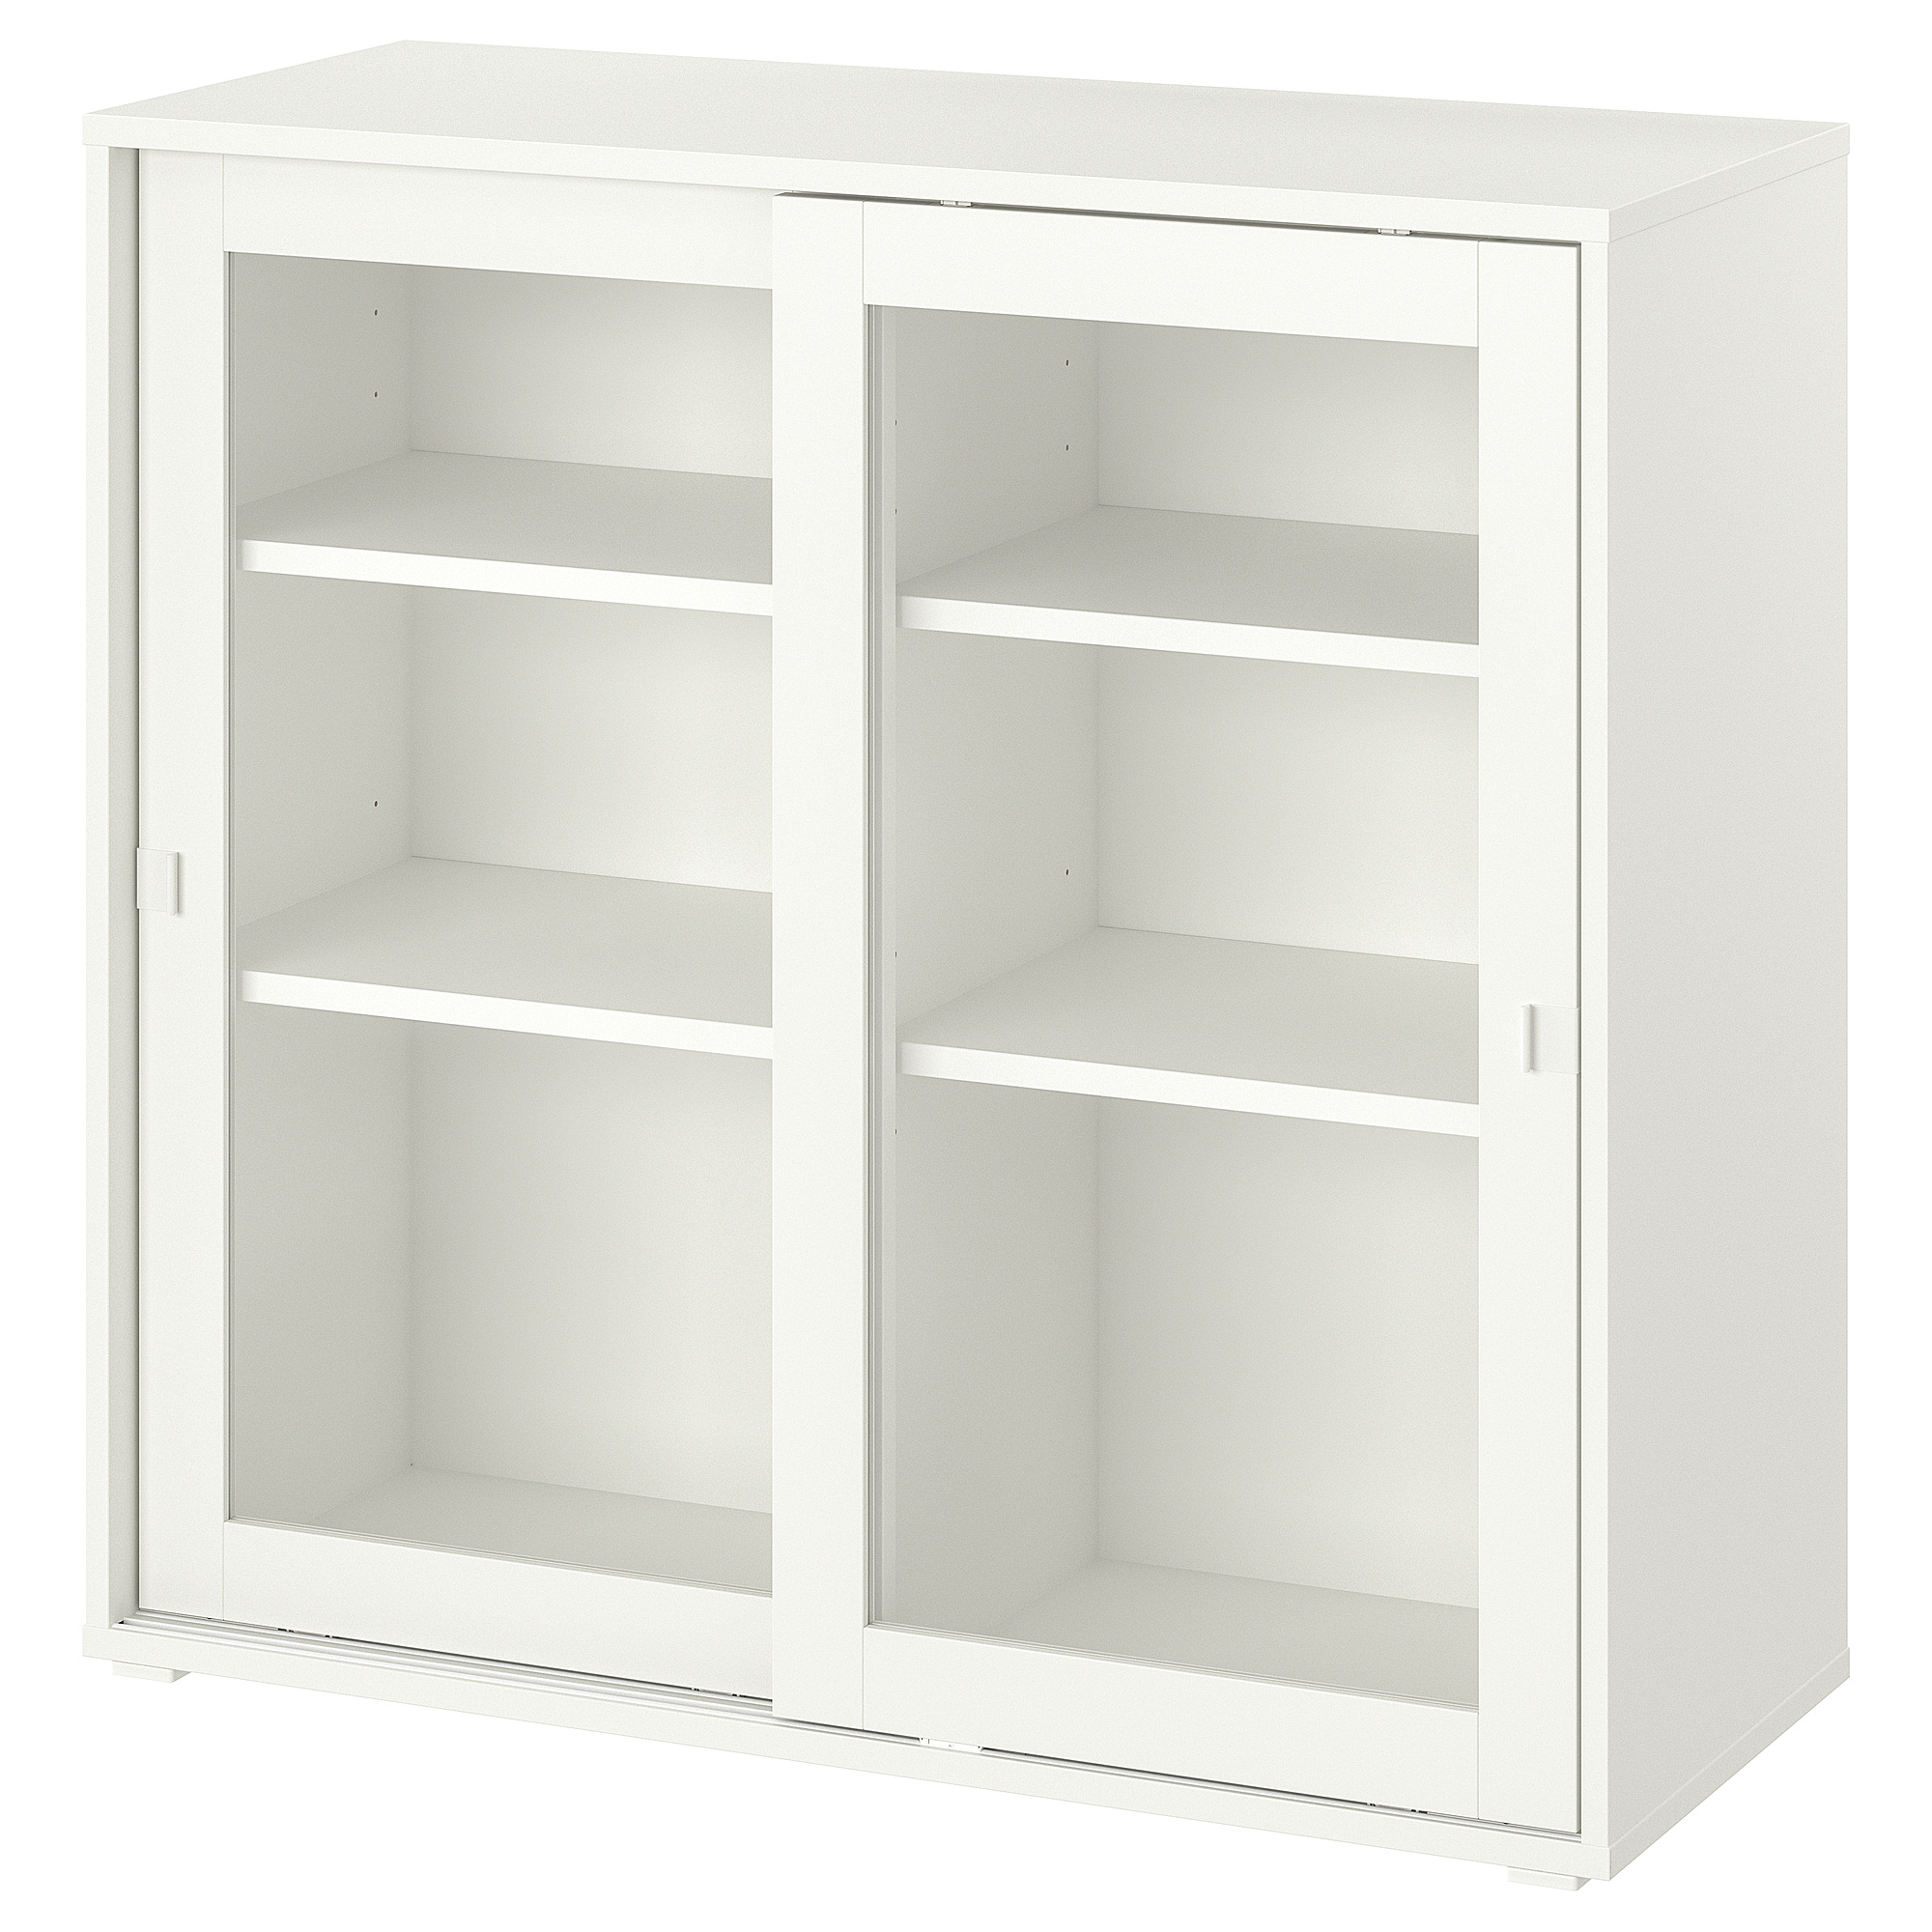 VIHALS cabinet with sliding glass doors